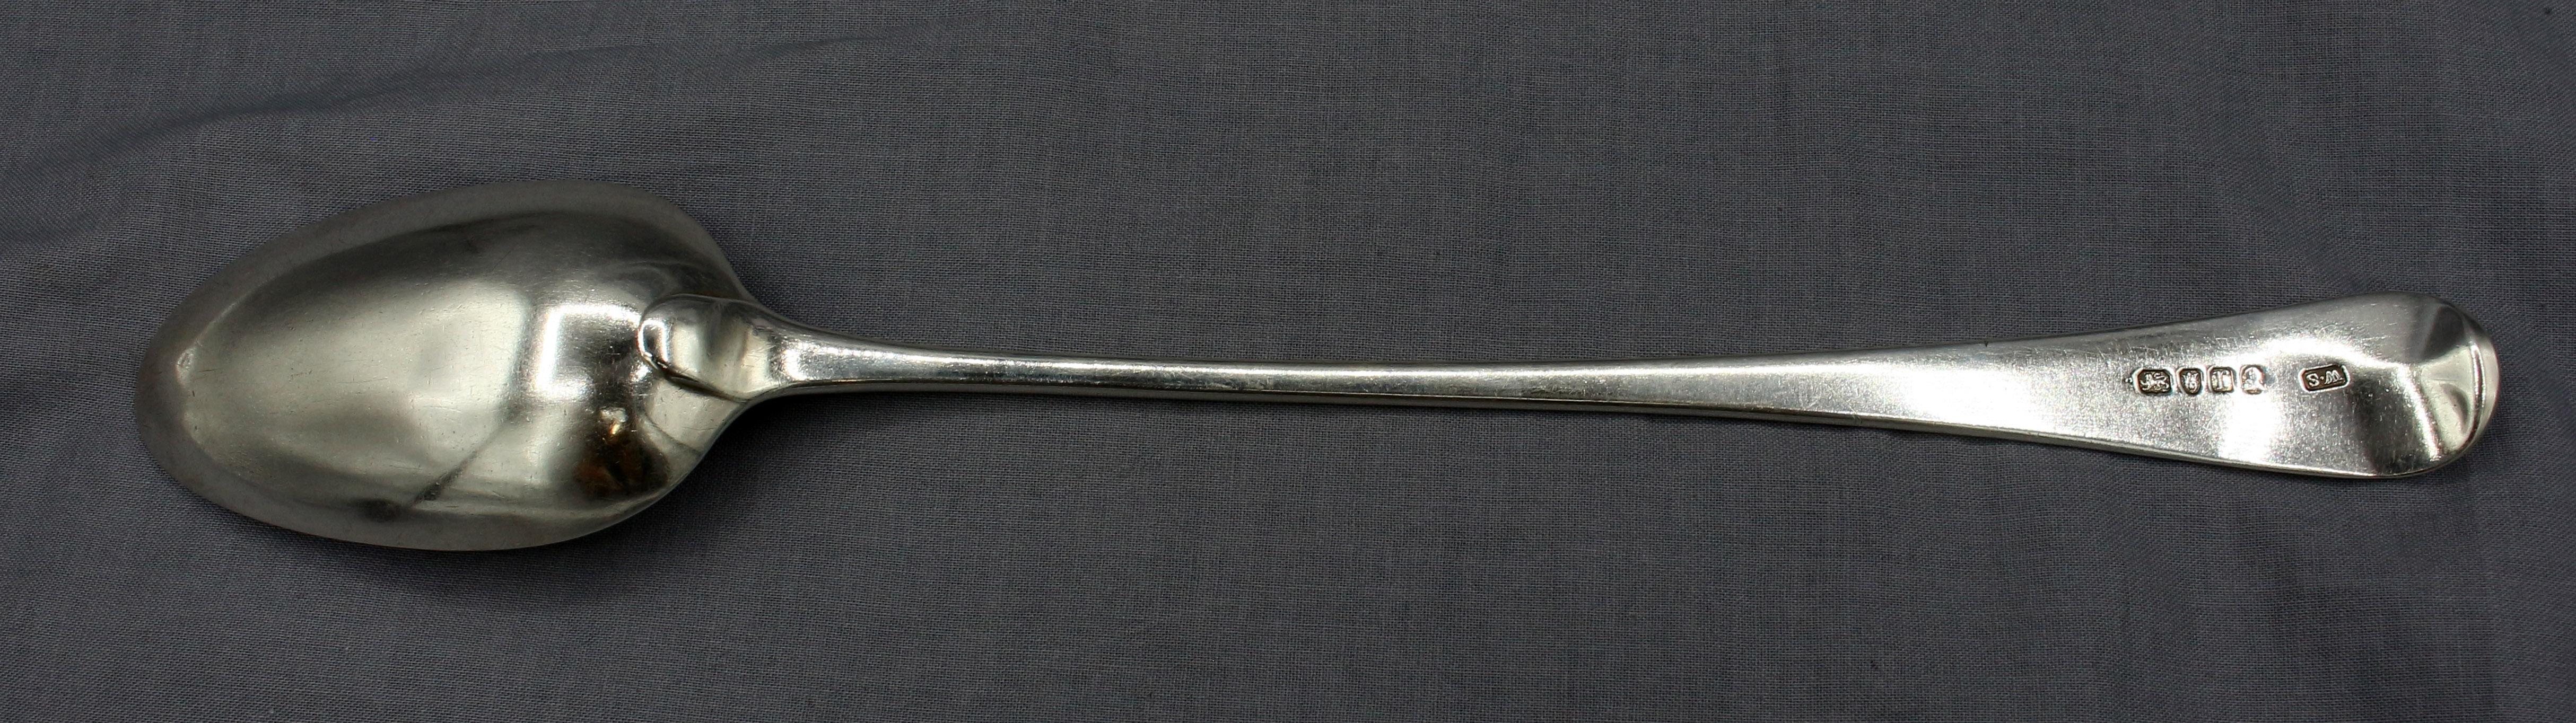 London, 1792, sterling silver Old English basting spoon. George III period by William Sutton of Cheapside. Monogram 